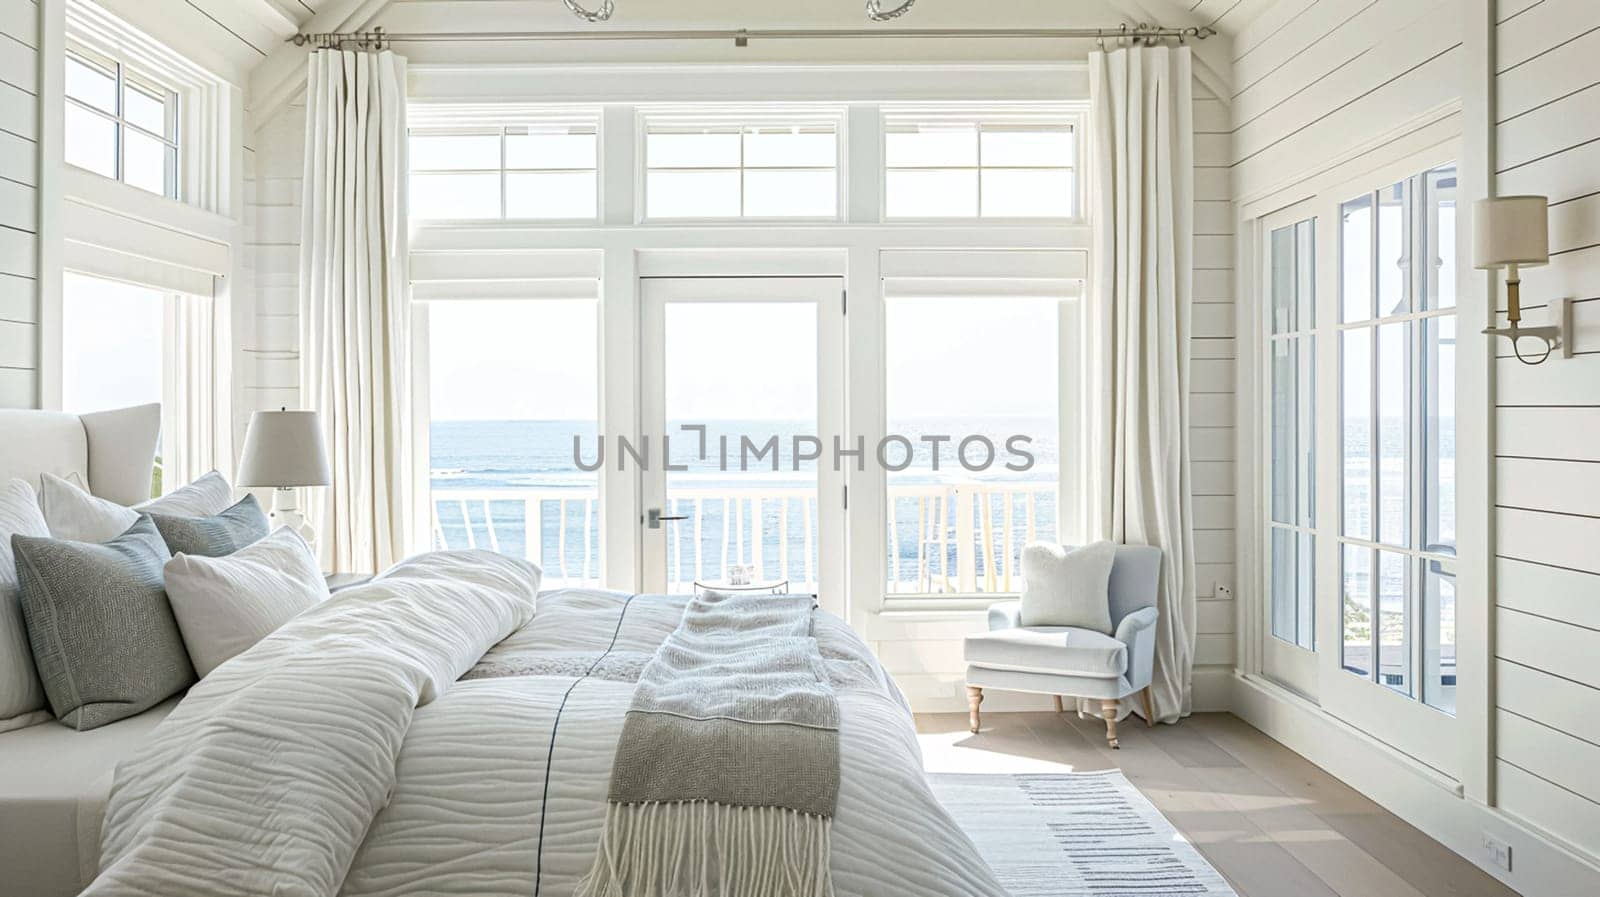 Beautiful interior of luxury bedroom with window sea view. Coastal cottage concept. High quality photo